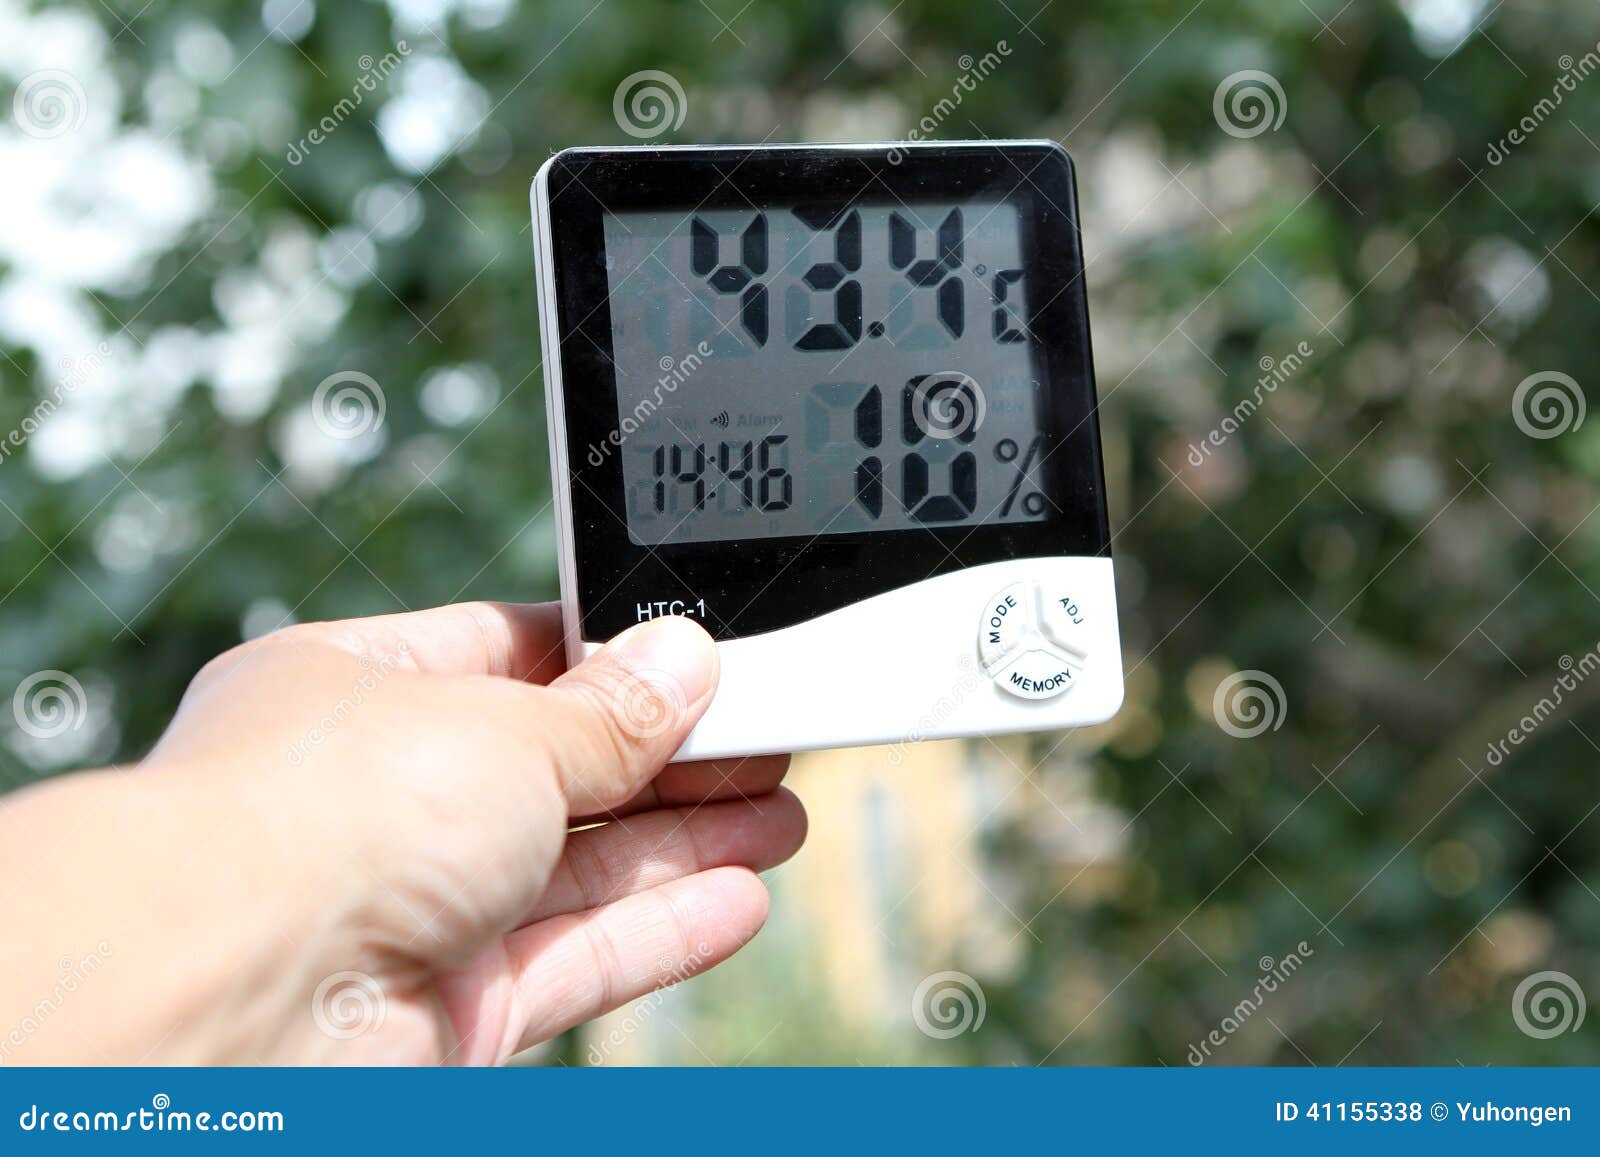 thermometer with shriveled plant Stock Photo